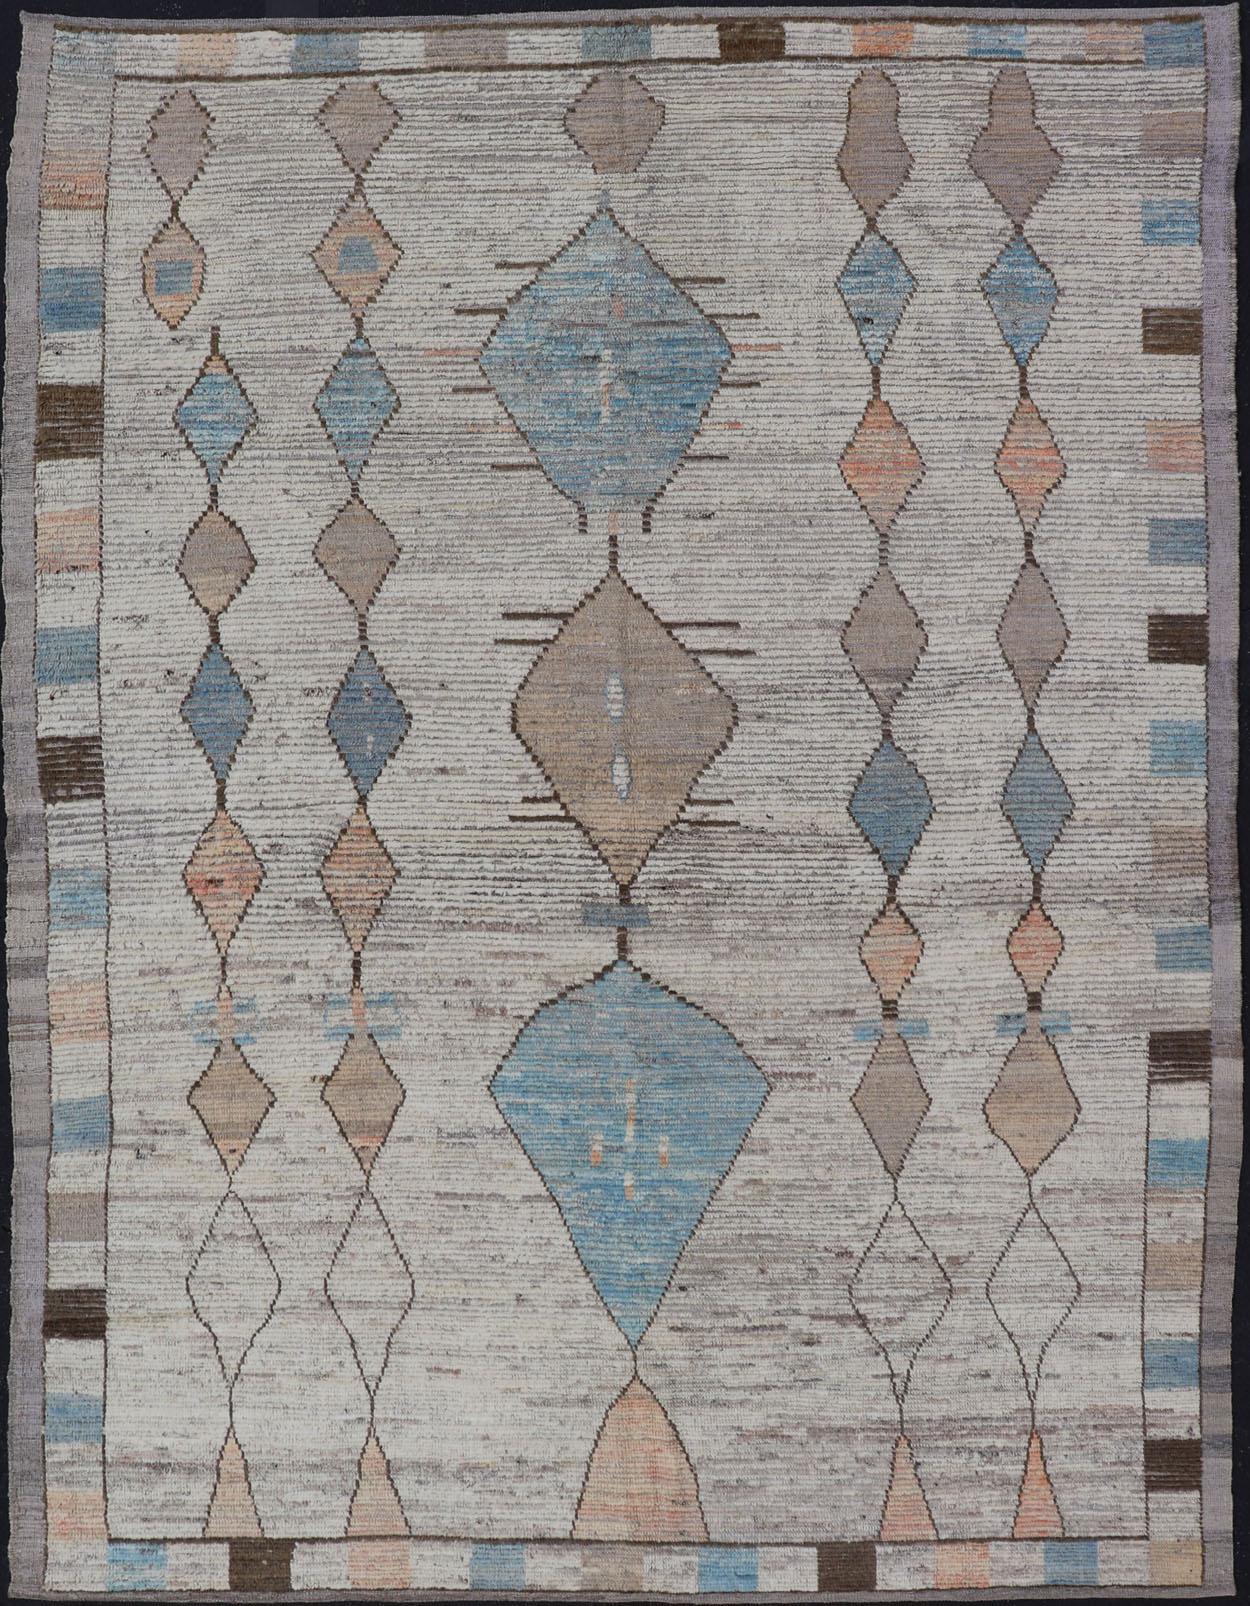 This modern casual area rug features a tribal diamond design reaching down the length of the field, alternating between turquois and a fleshy peach. The earthy tones give the rug an over-all aged look, while keeping it's casual charm. The background